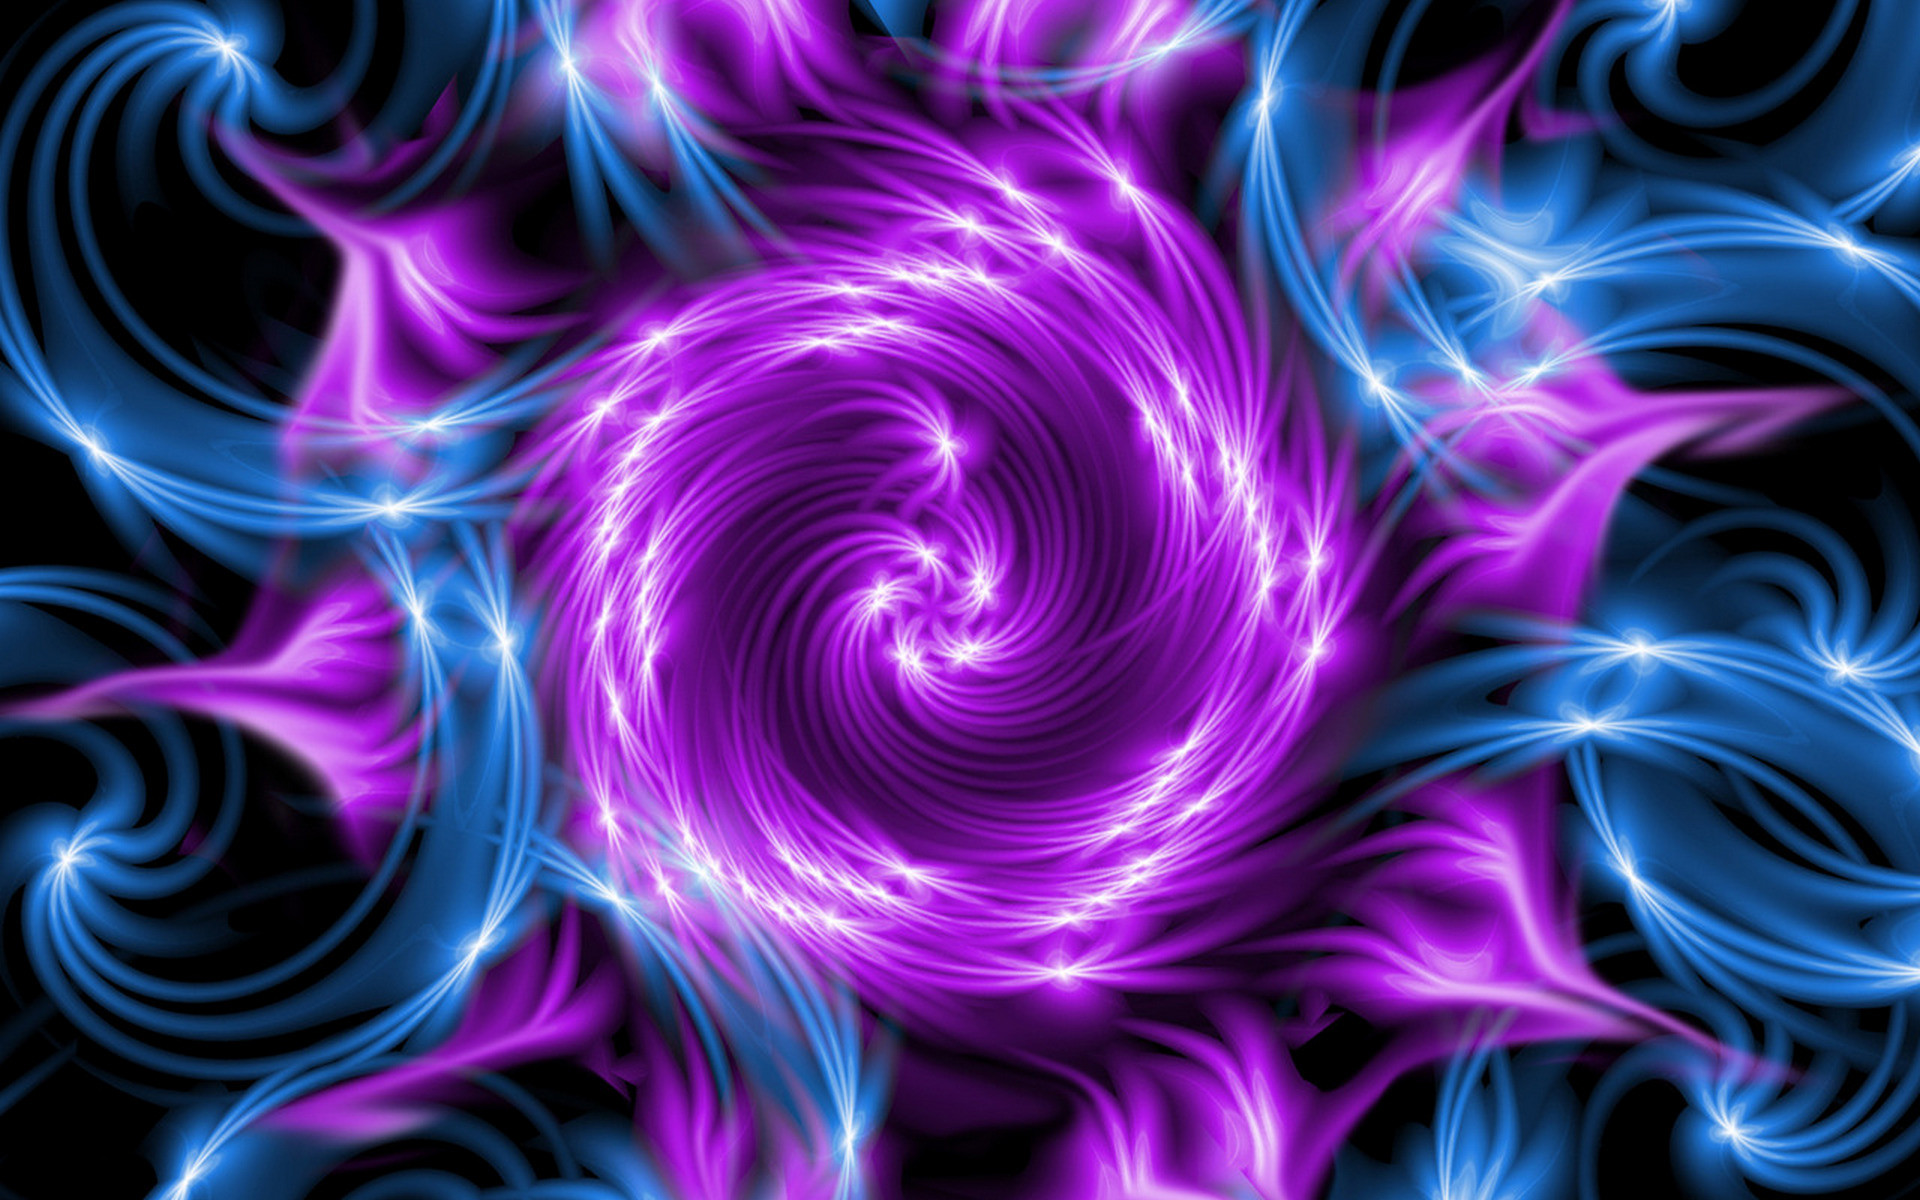 1920x1200 ... Images of Purple Swirl Wallpaper Abstract - #SC ...